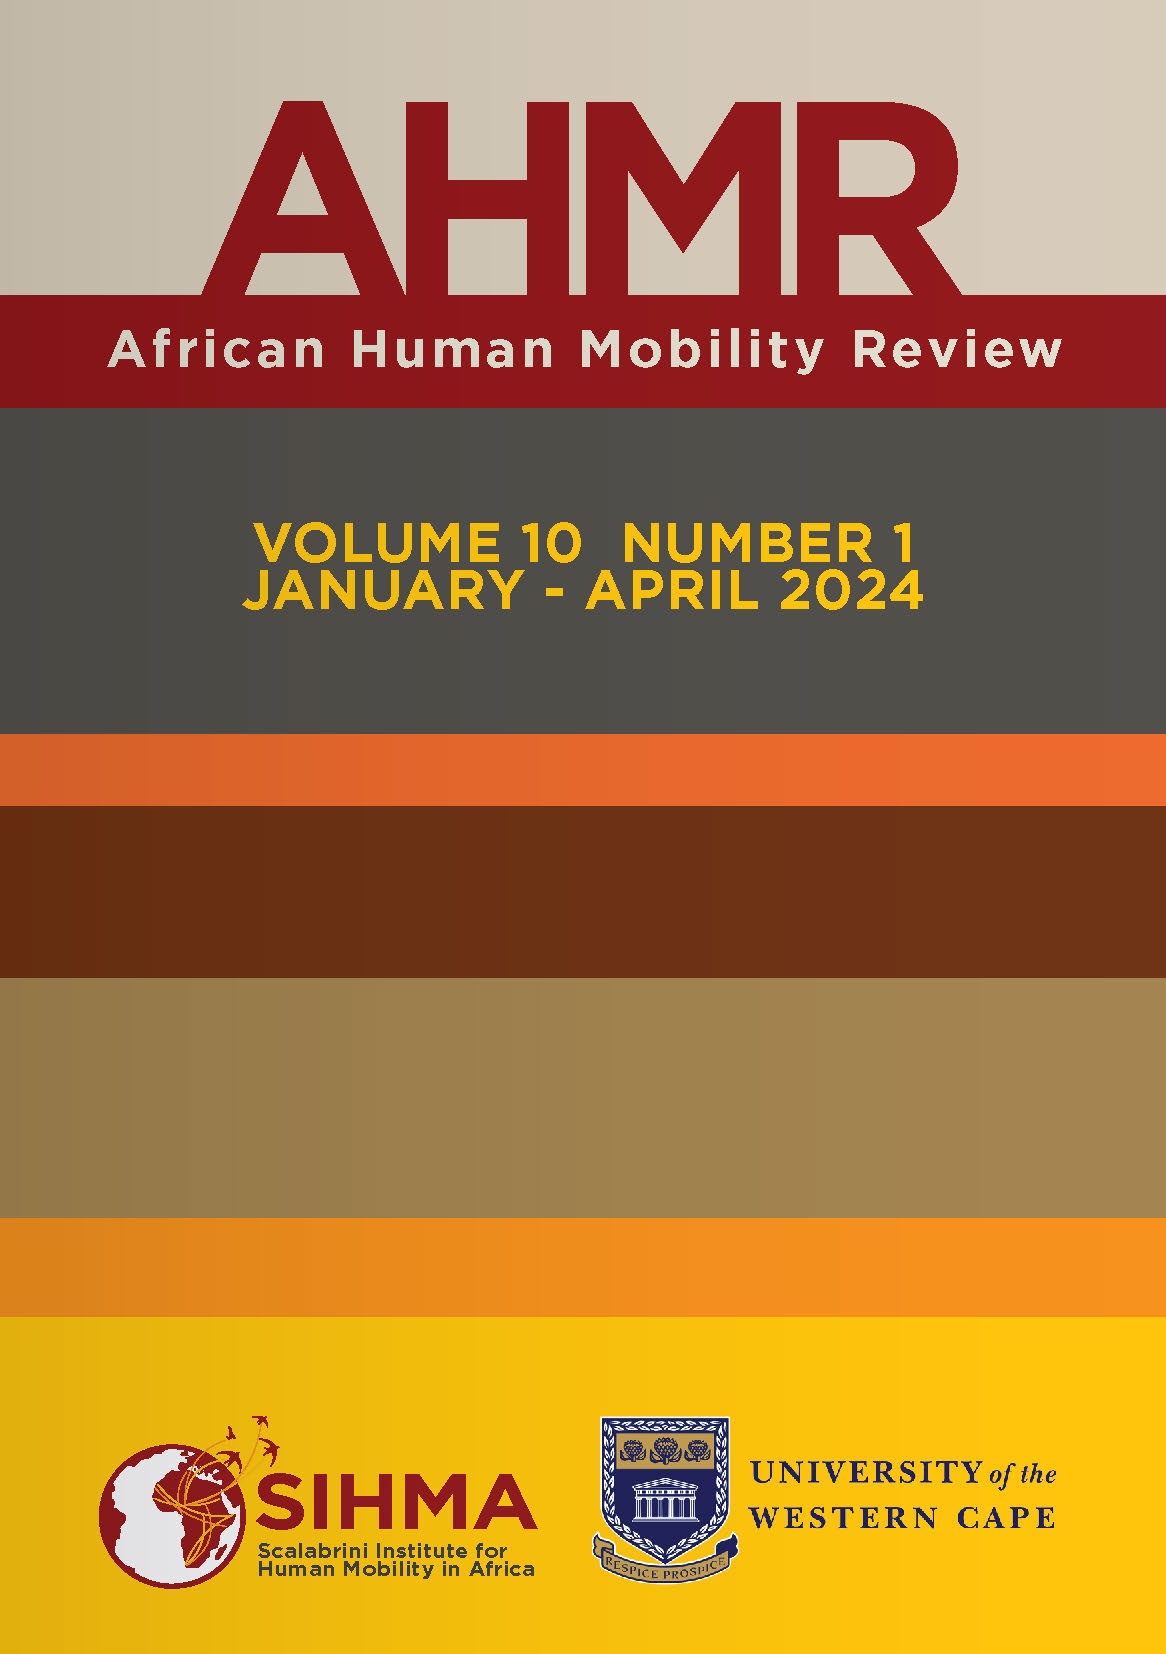 https://sihma.org.za/photos/shares/AHMR COVER ONLINE volume 10 number 1.jpg